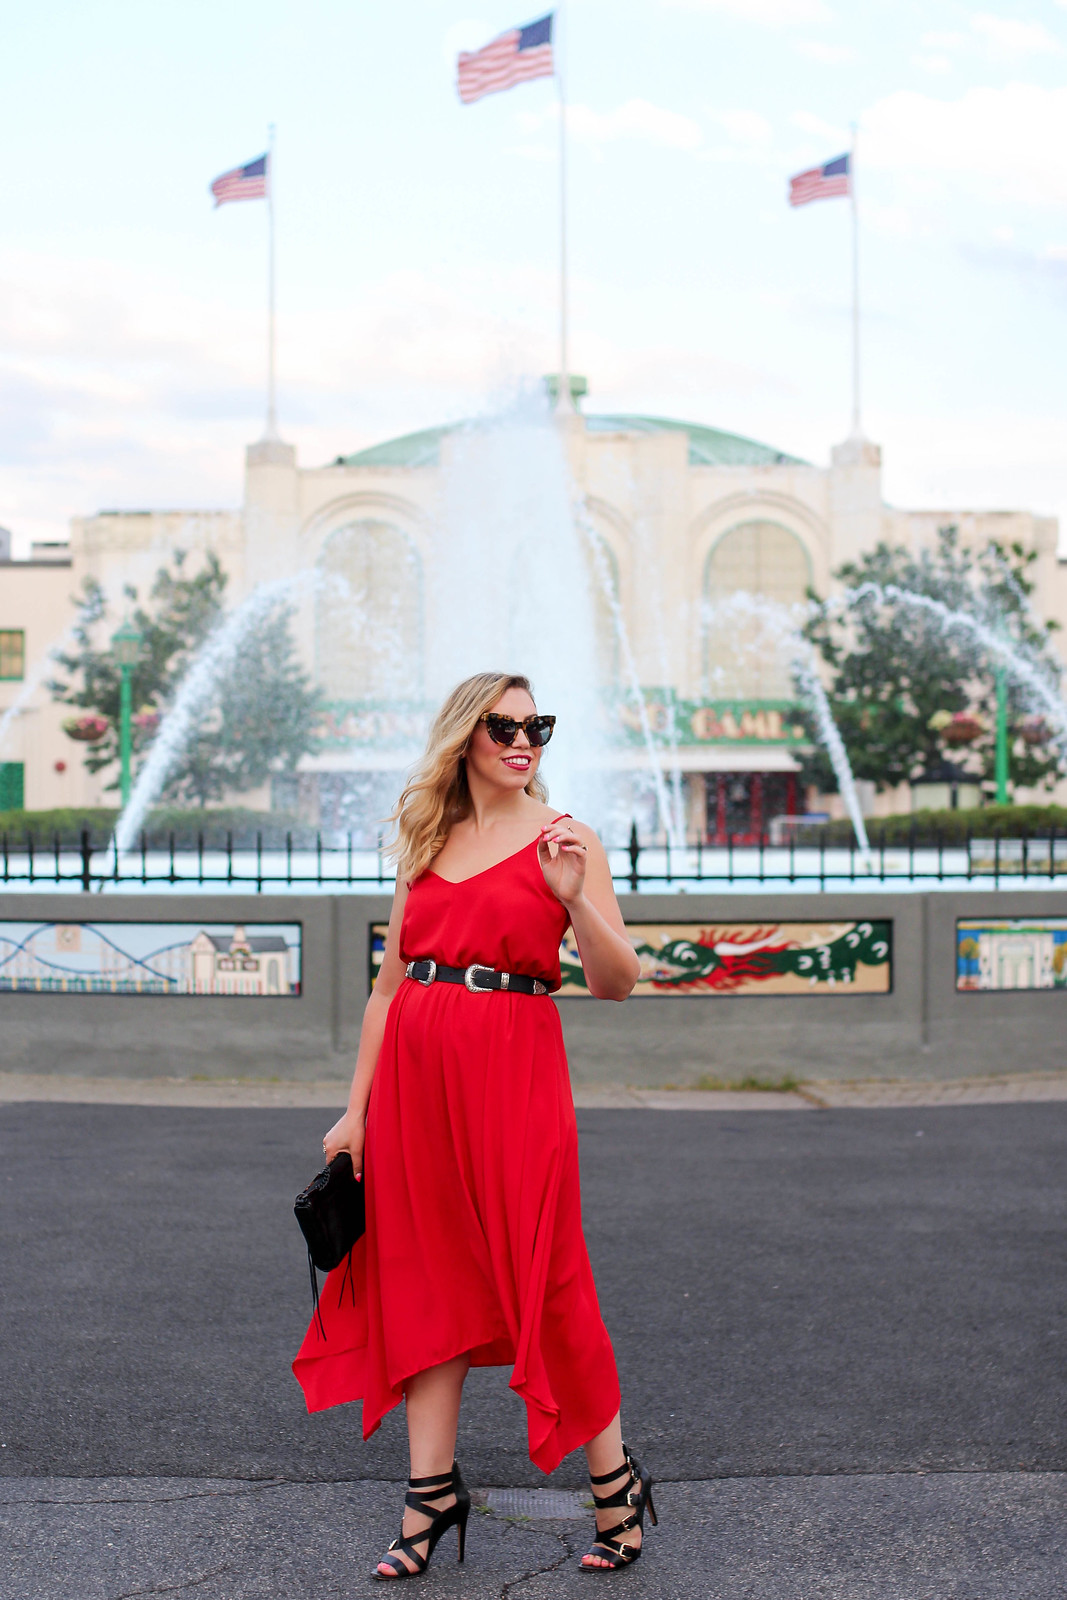 Lulu's Red Mini Dress ASOS Double Buckle Western Belt Black Strappy Sandals Summer Edgy Style Playland Rye Westchester New York Living After Midnite Jackie Giardina Blogger